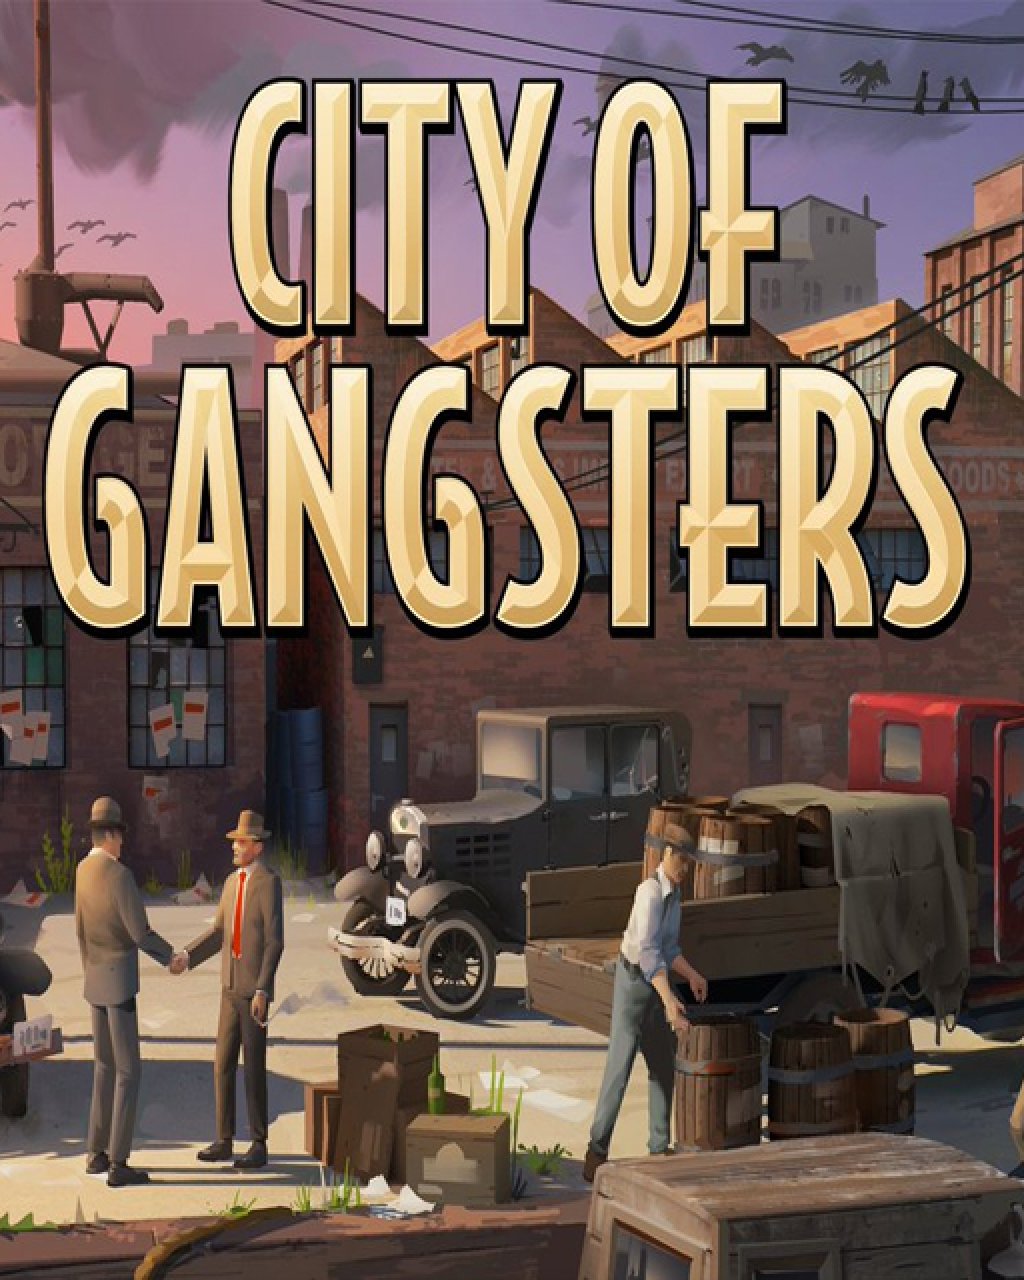 ESD City of Gangsters